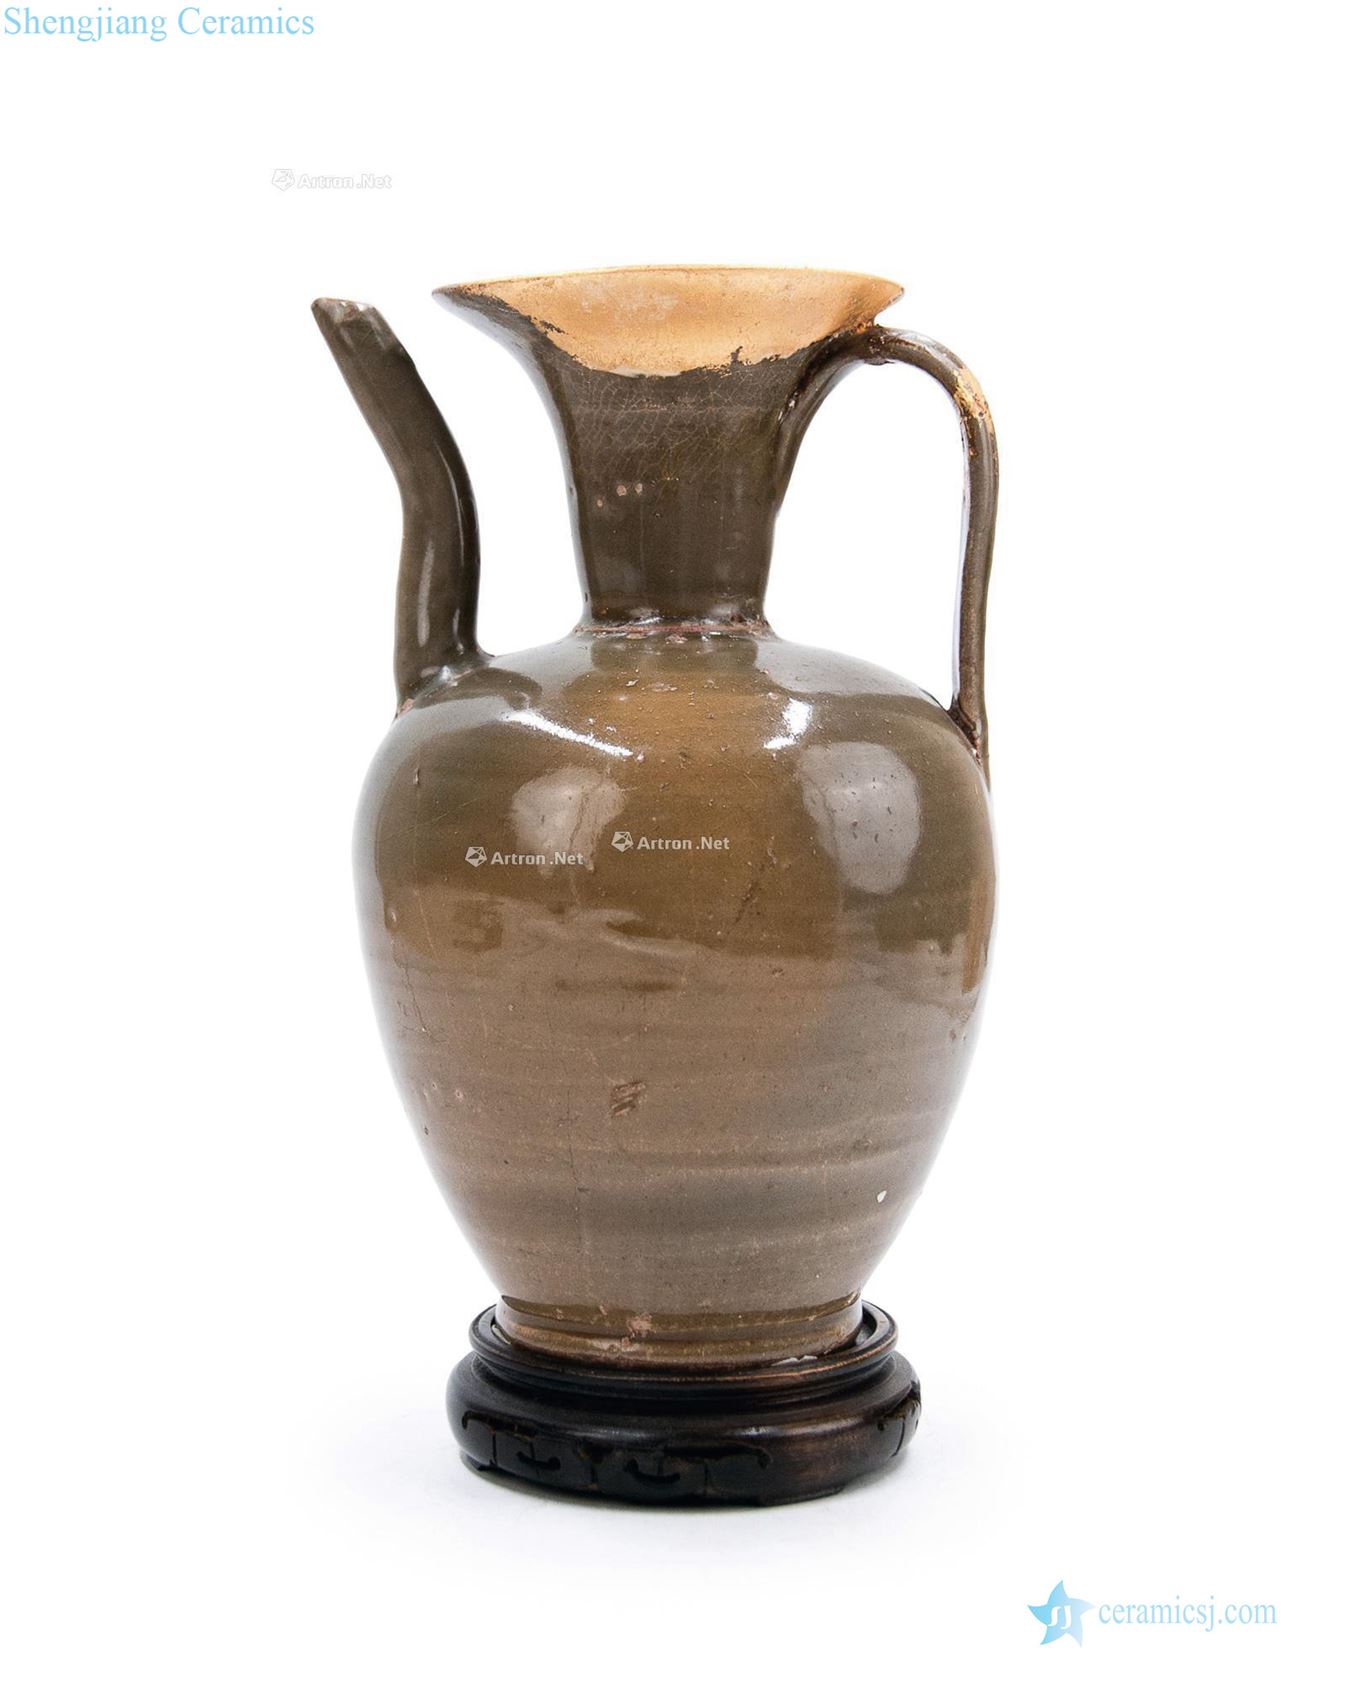 The song dynasty celadon ewer